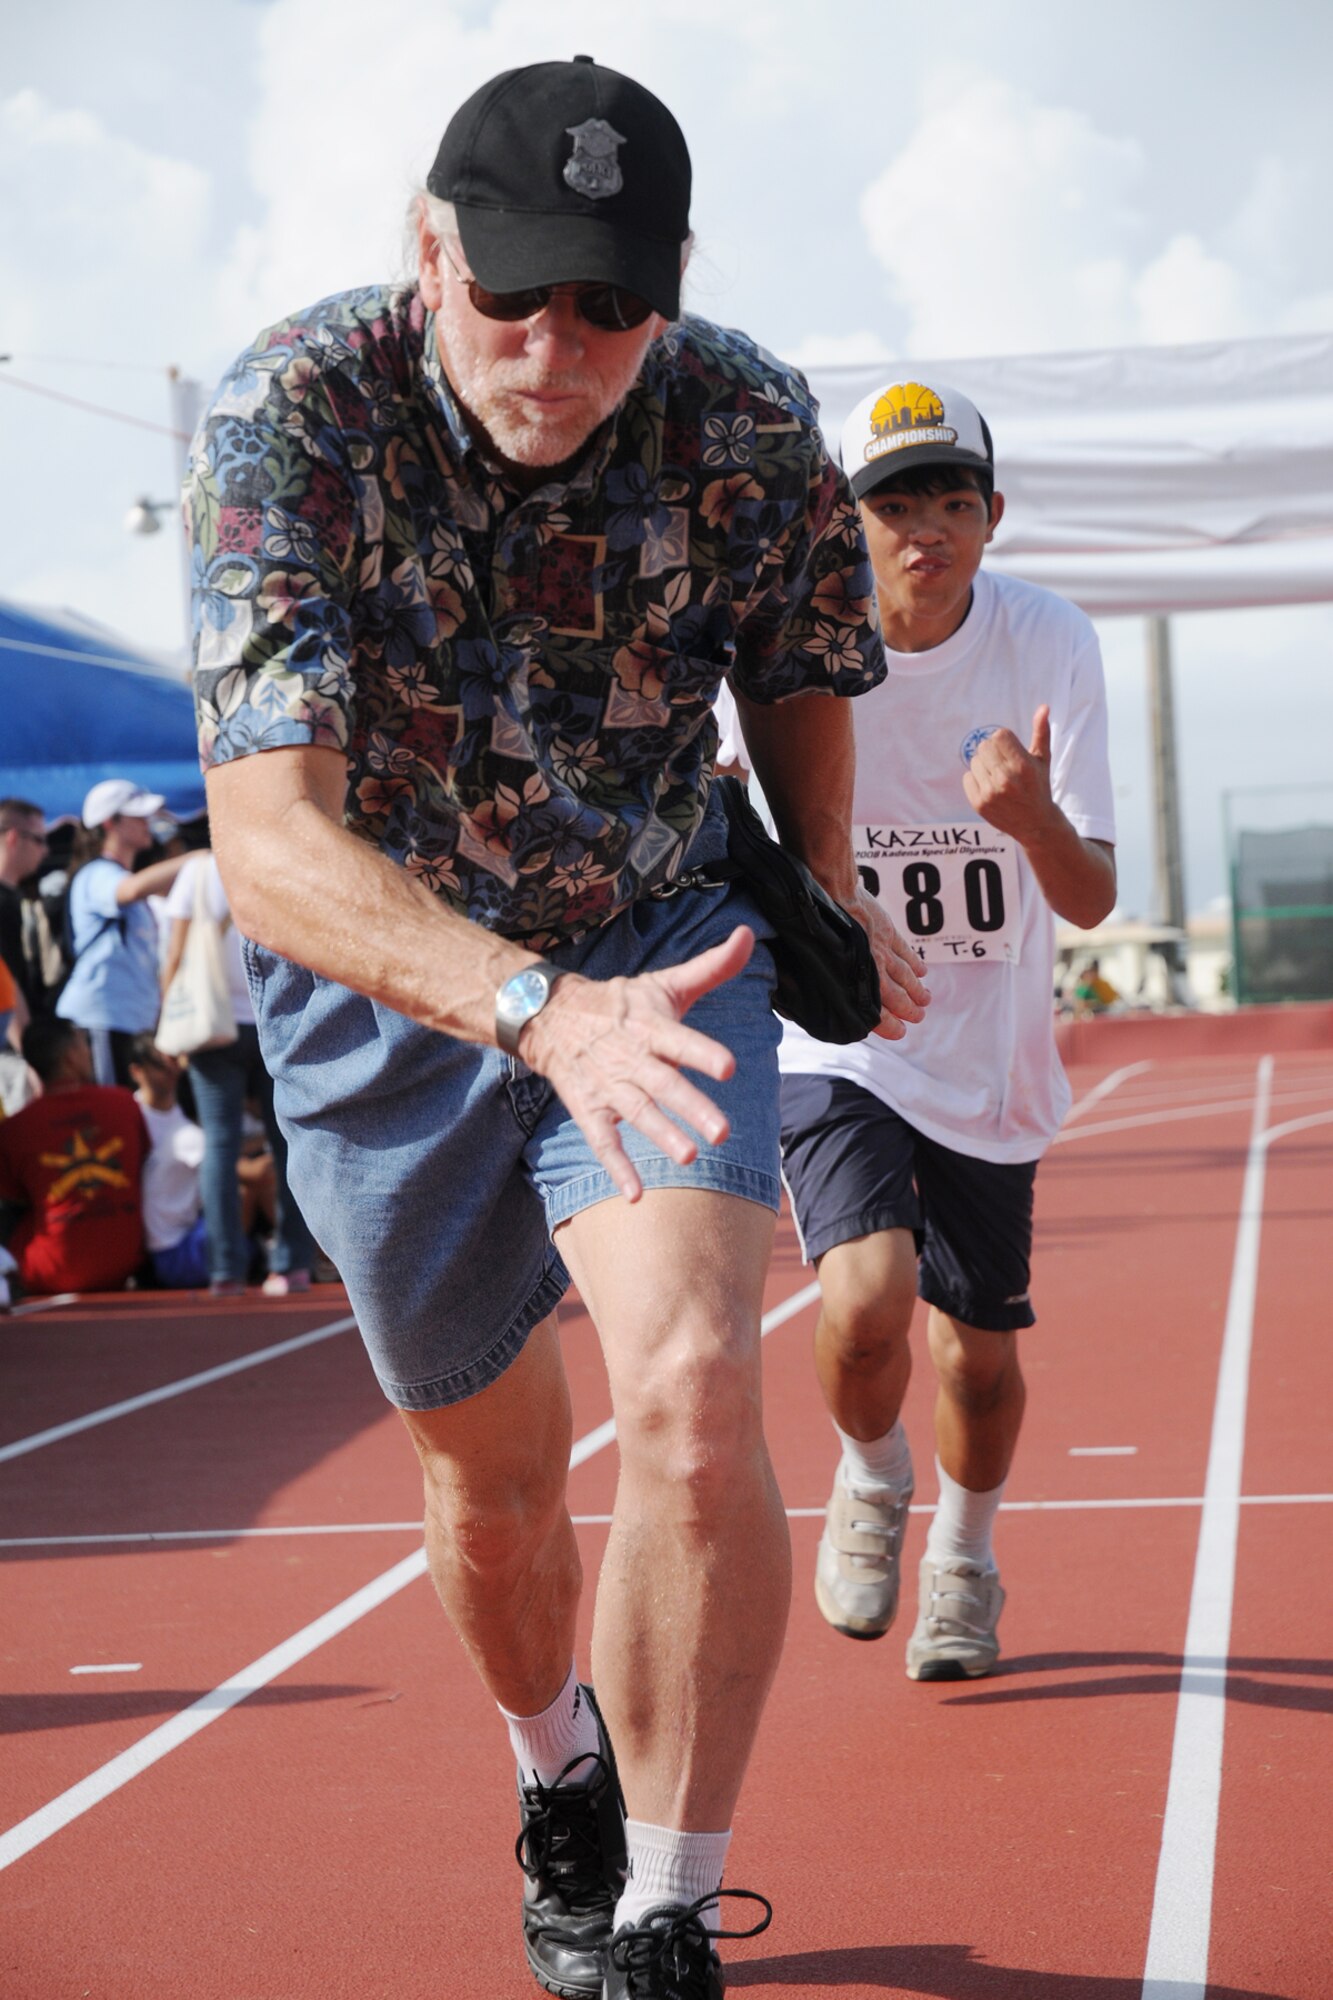 Larry Swink, a volunteer, helps Kazuki-san, 15, practice passing the baton before the 400 meter relay during the Kadena Special Olympics Nov. 8, 2008. Kadena Air Base hosted the 9th Annual Special Olympic Games and Art Festival for special needs Okinawan and American athletes. (U.S. Air Force photo/Airman 1st Class Chad Warren)
                                             